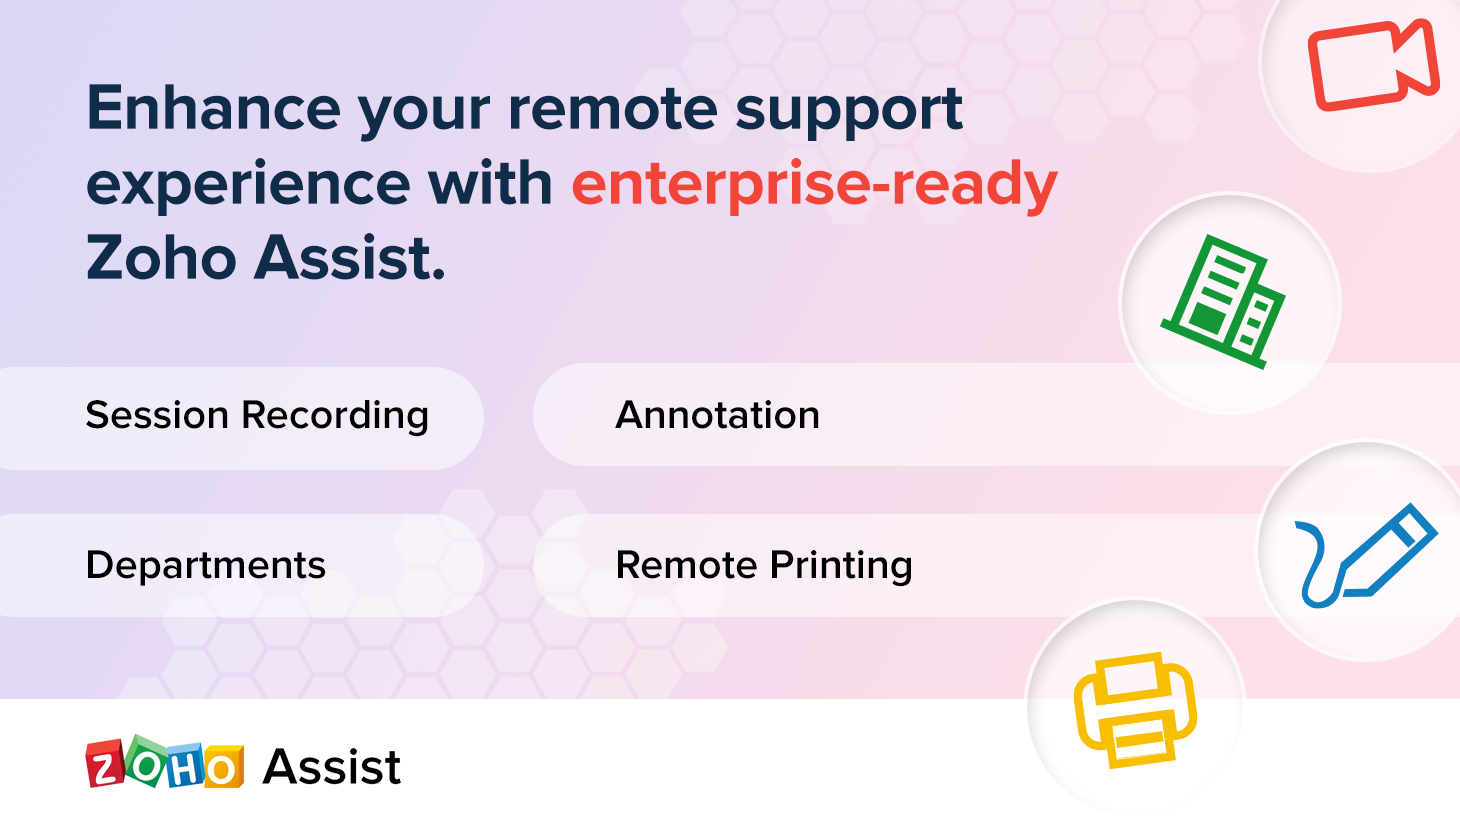 It's here! Rolling out Session Recording, Annotation, Remote Printing, and more in Zoho Assist.